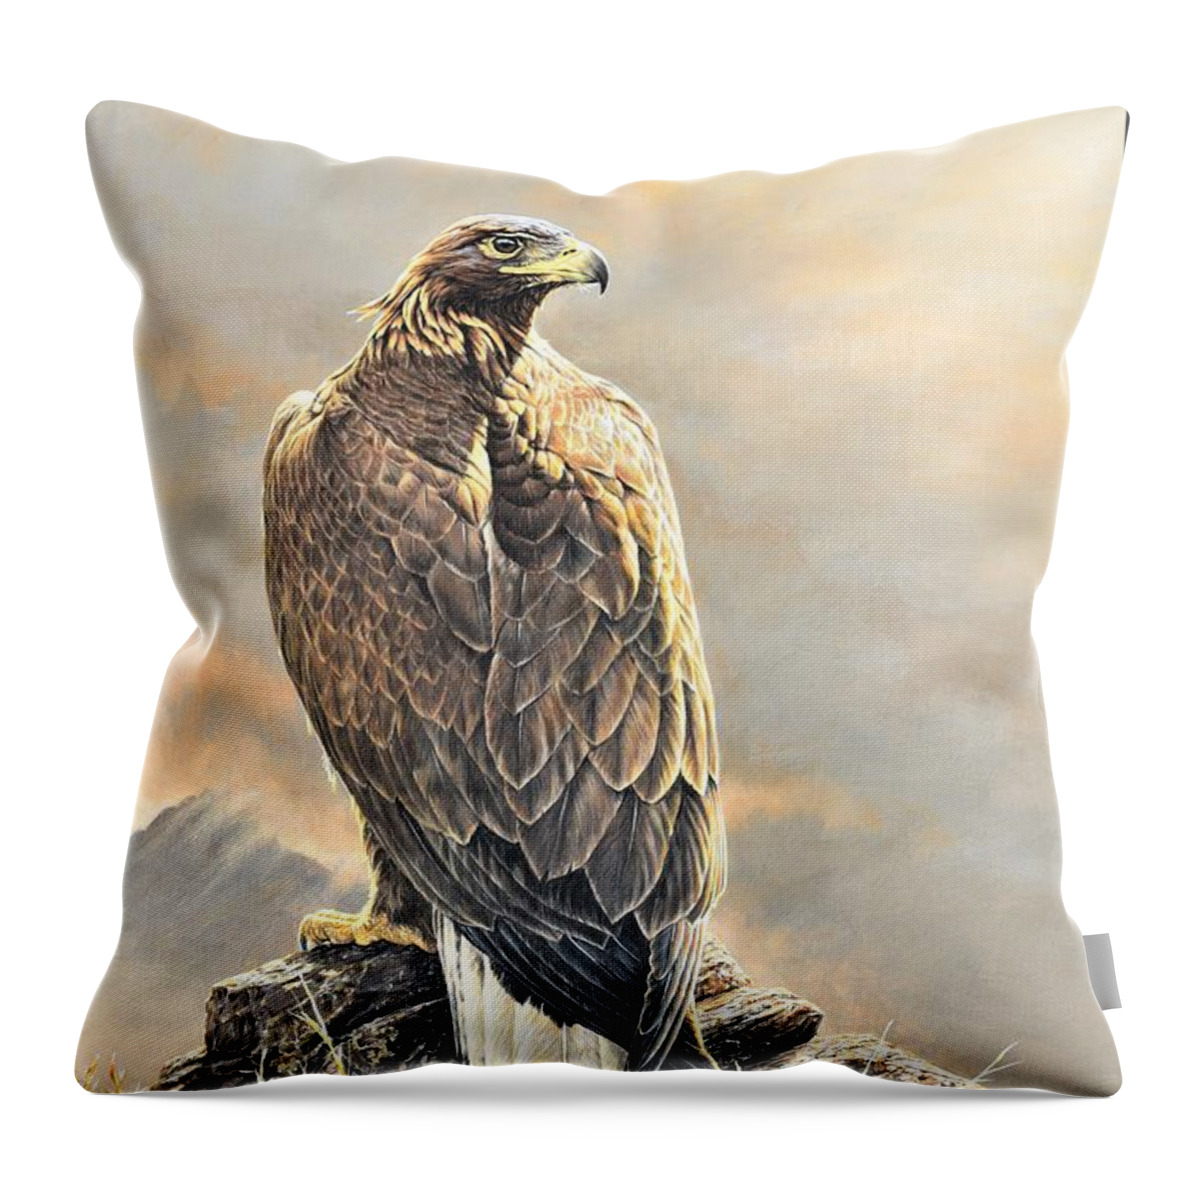 Paintings Throw Pillow featuring the painting Highlander - Golden Eagle by Alan M Hunt